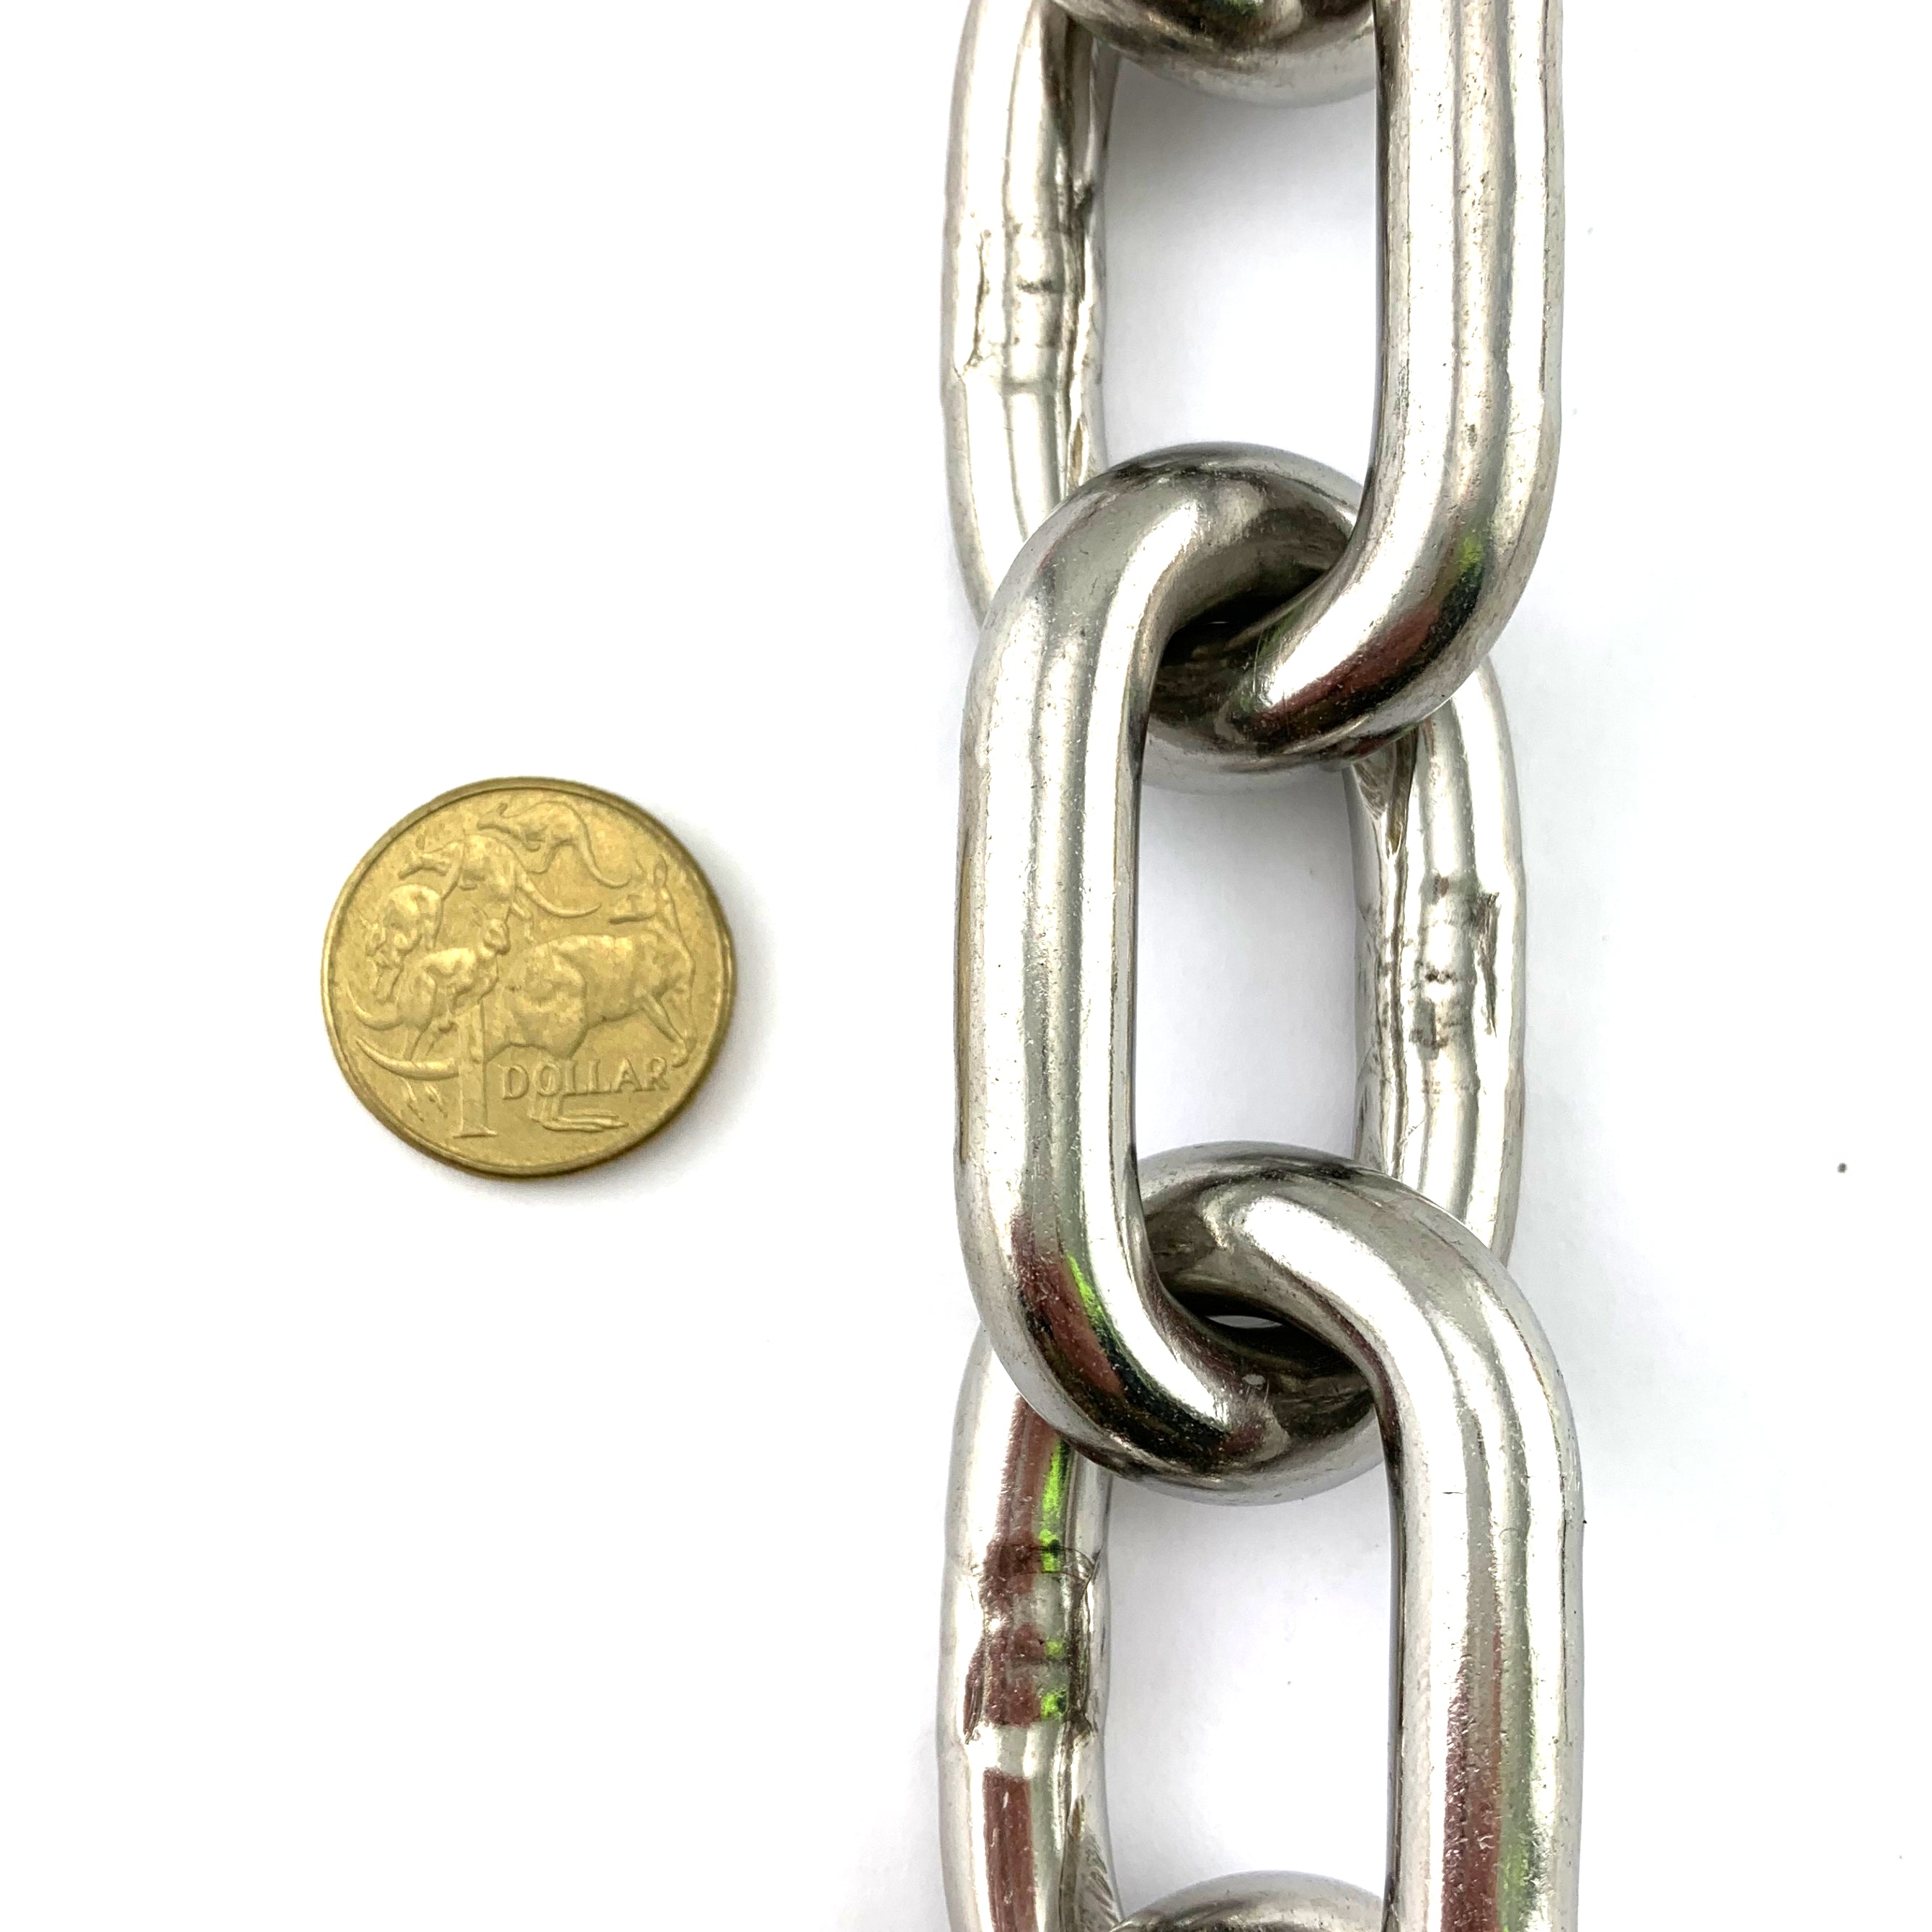 10mm stainless steel welded link chain in a 25kg bucket, with 13.6 metres of chain. Melbourne, Australia.